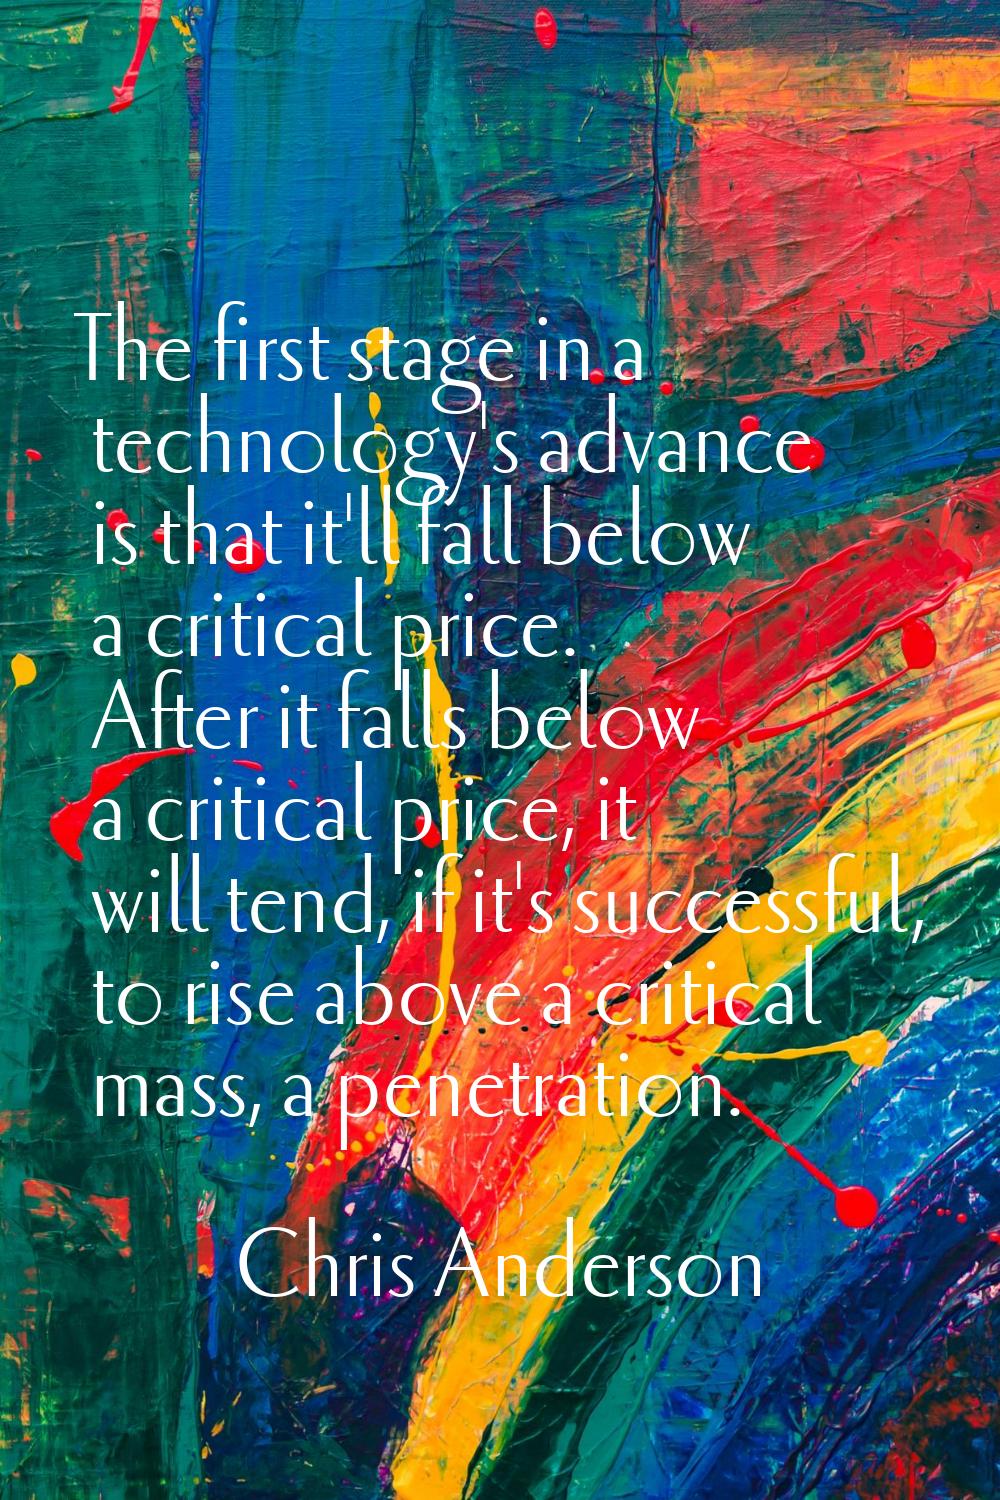 The first stage in a technology's advance is that it'll fall below a critical price. After it falls